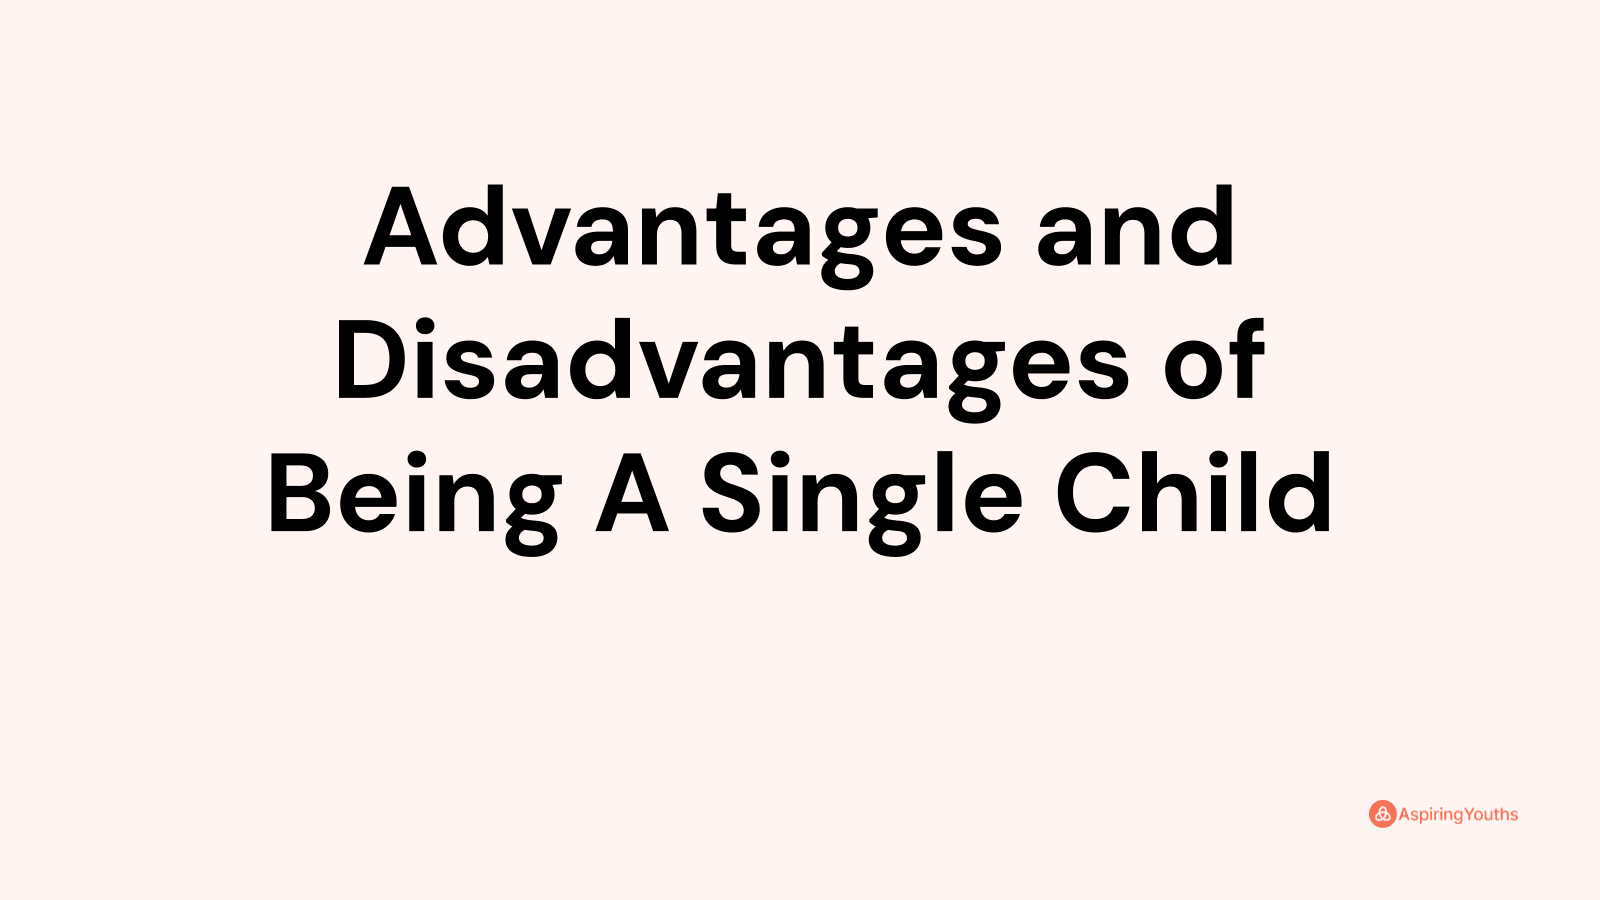 Advantages and disadvantages of Being A Single Child